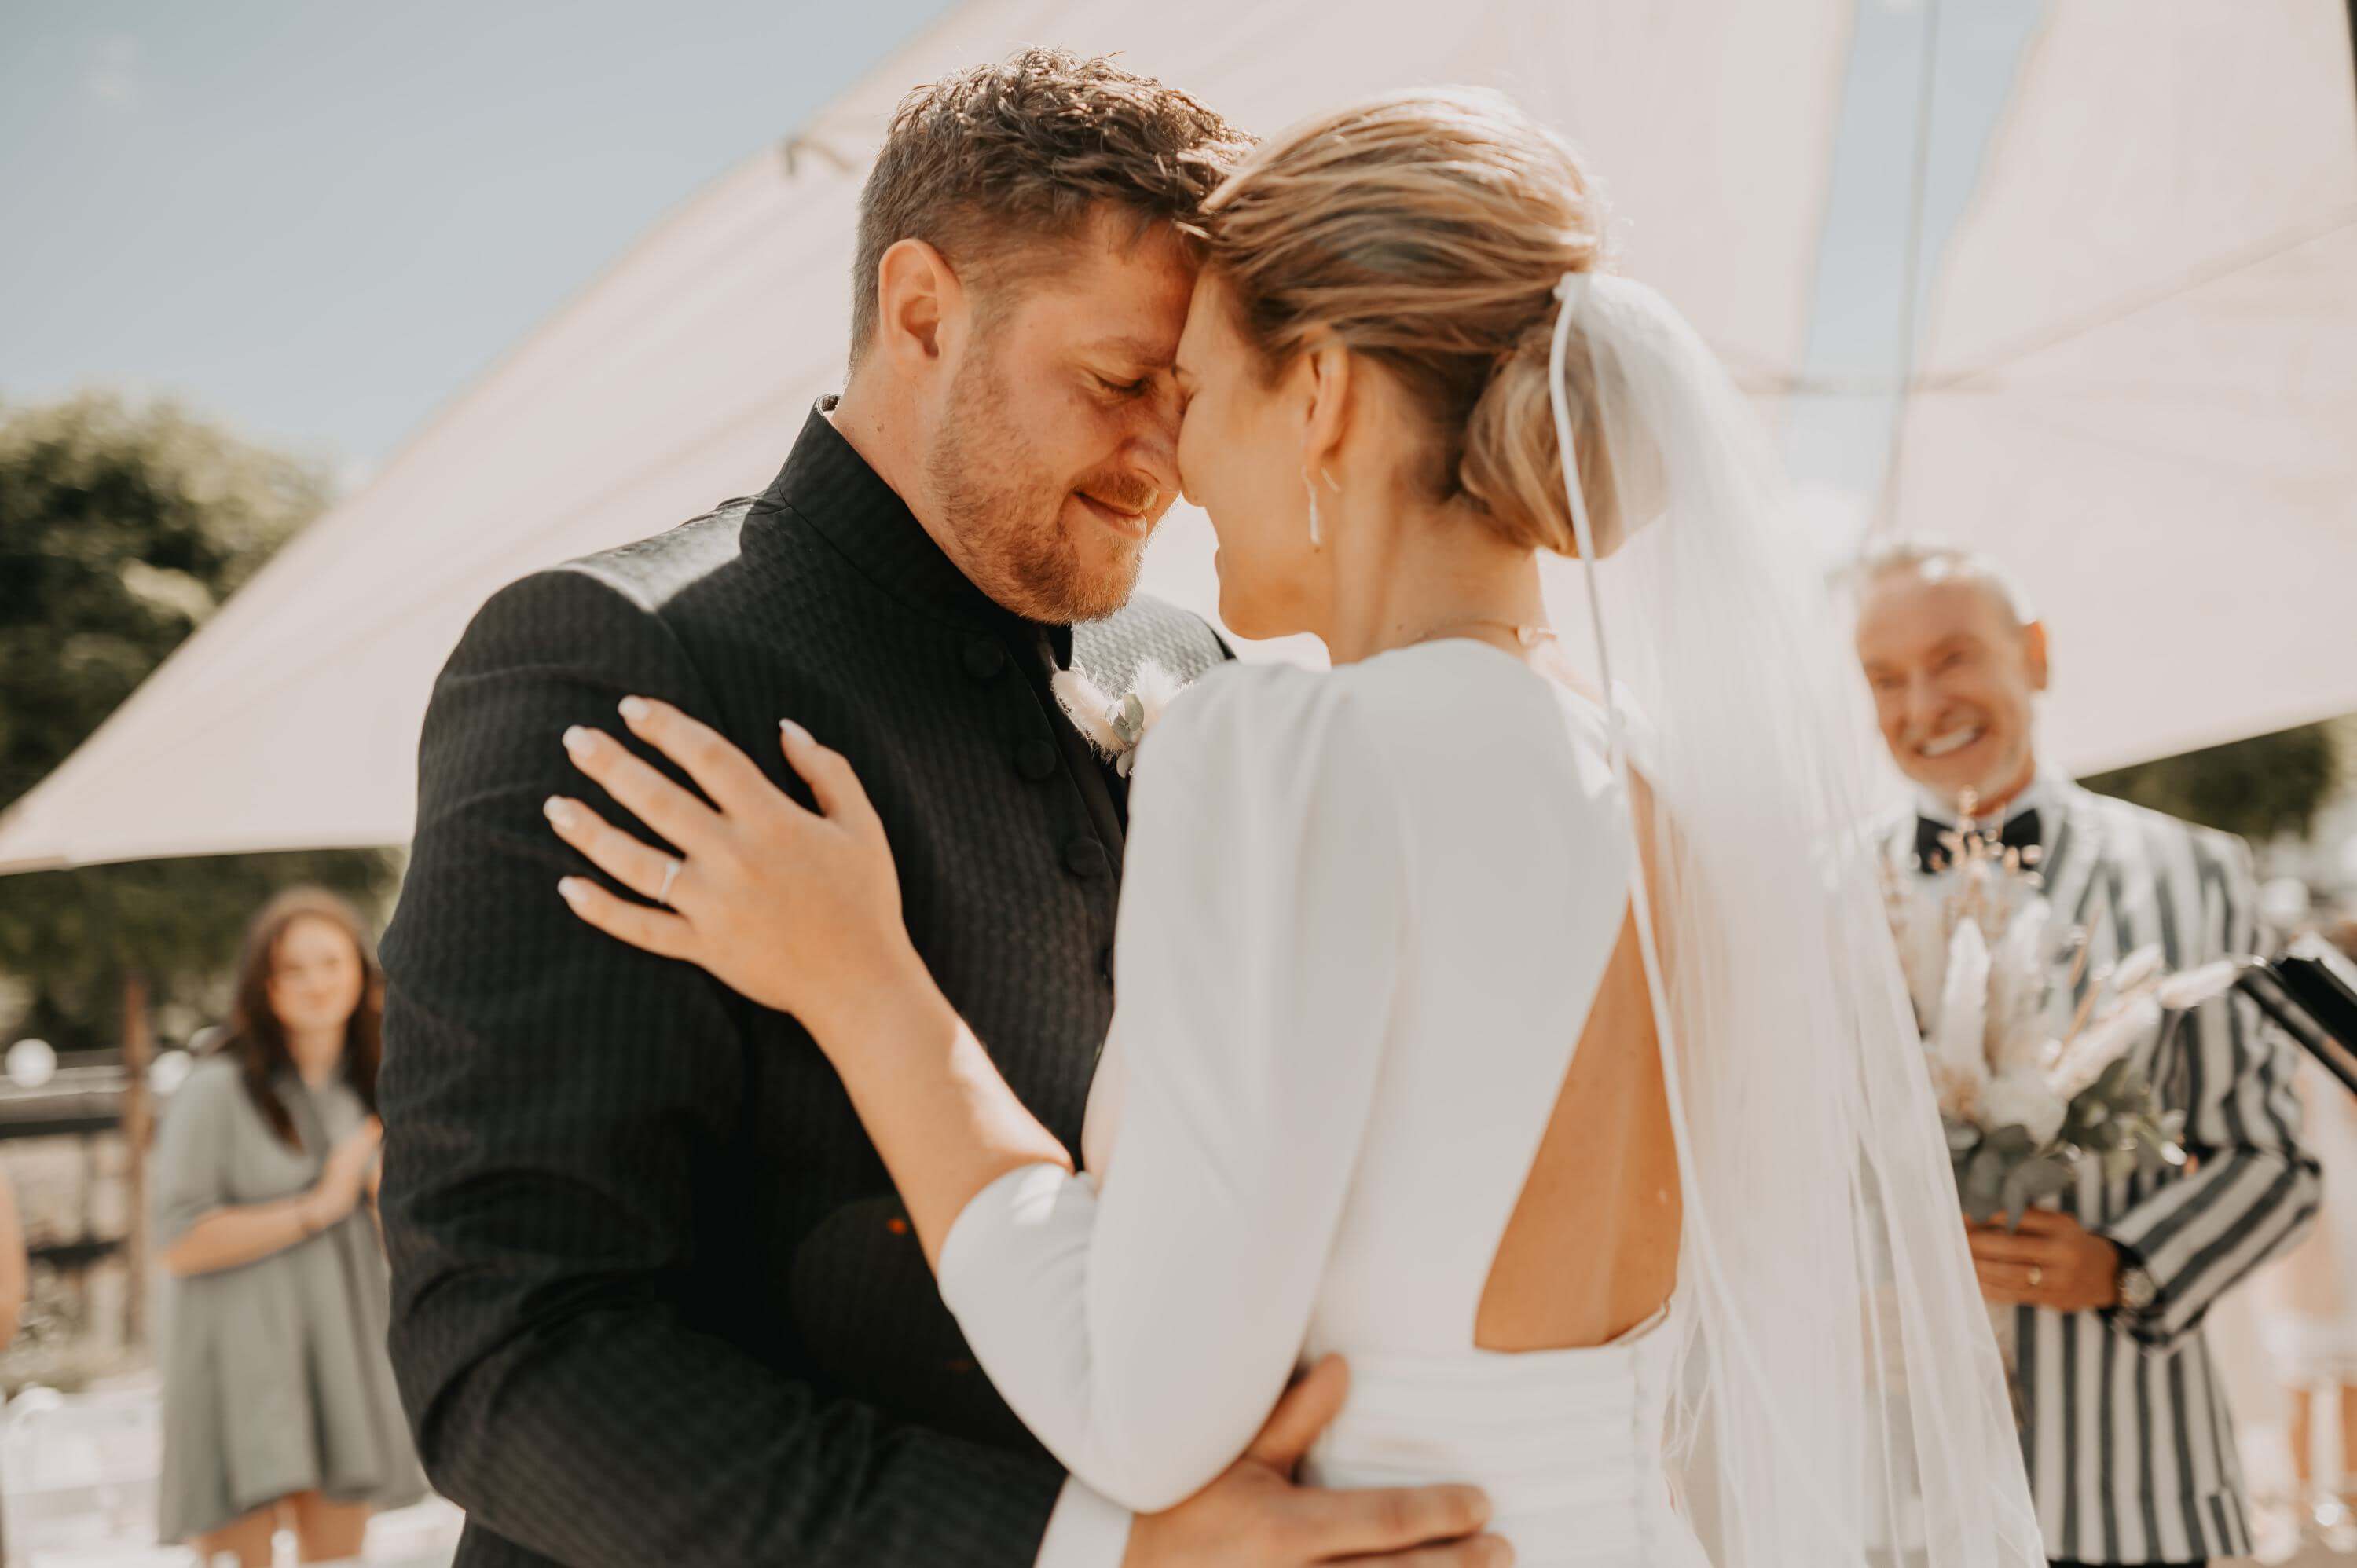 During the speech of the wedding speaker at a free wedding ceremony in the sun, the bridal couple face each other forehead to forehead. Both are smiling and have their eyes closed.